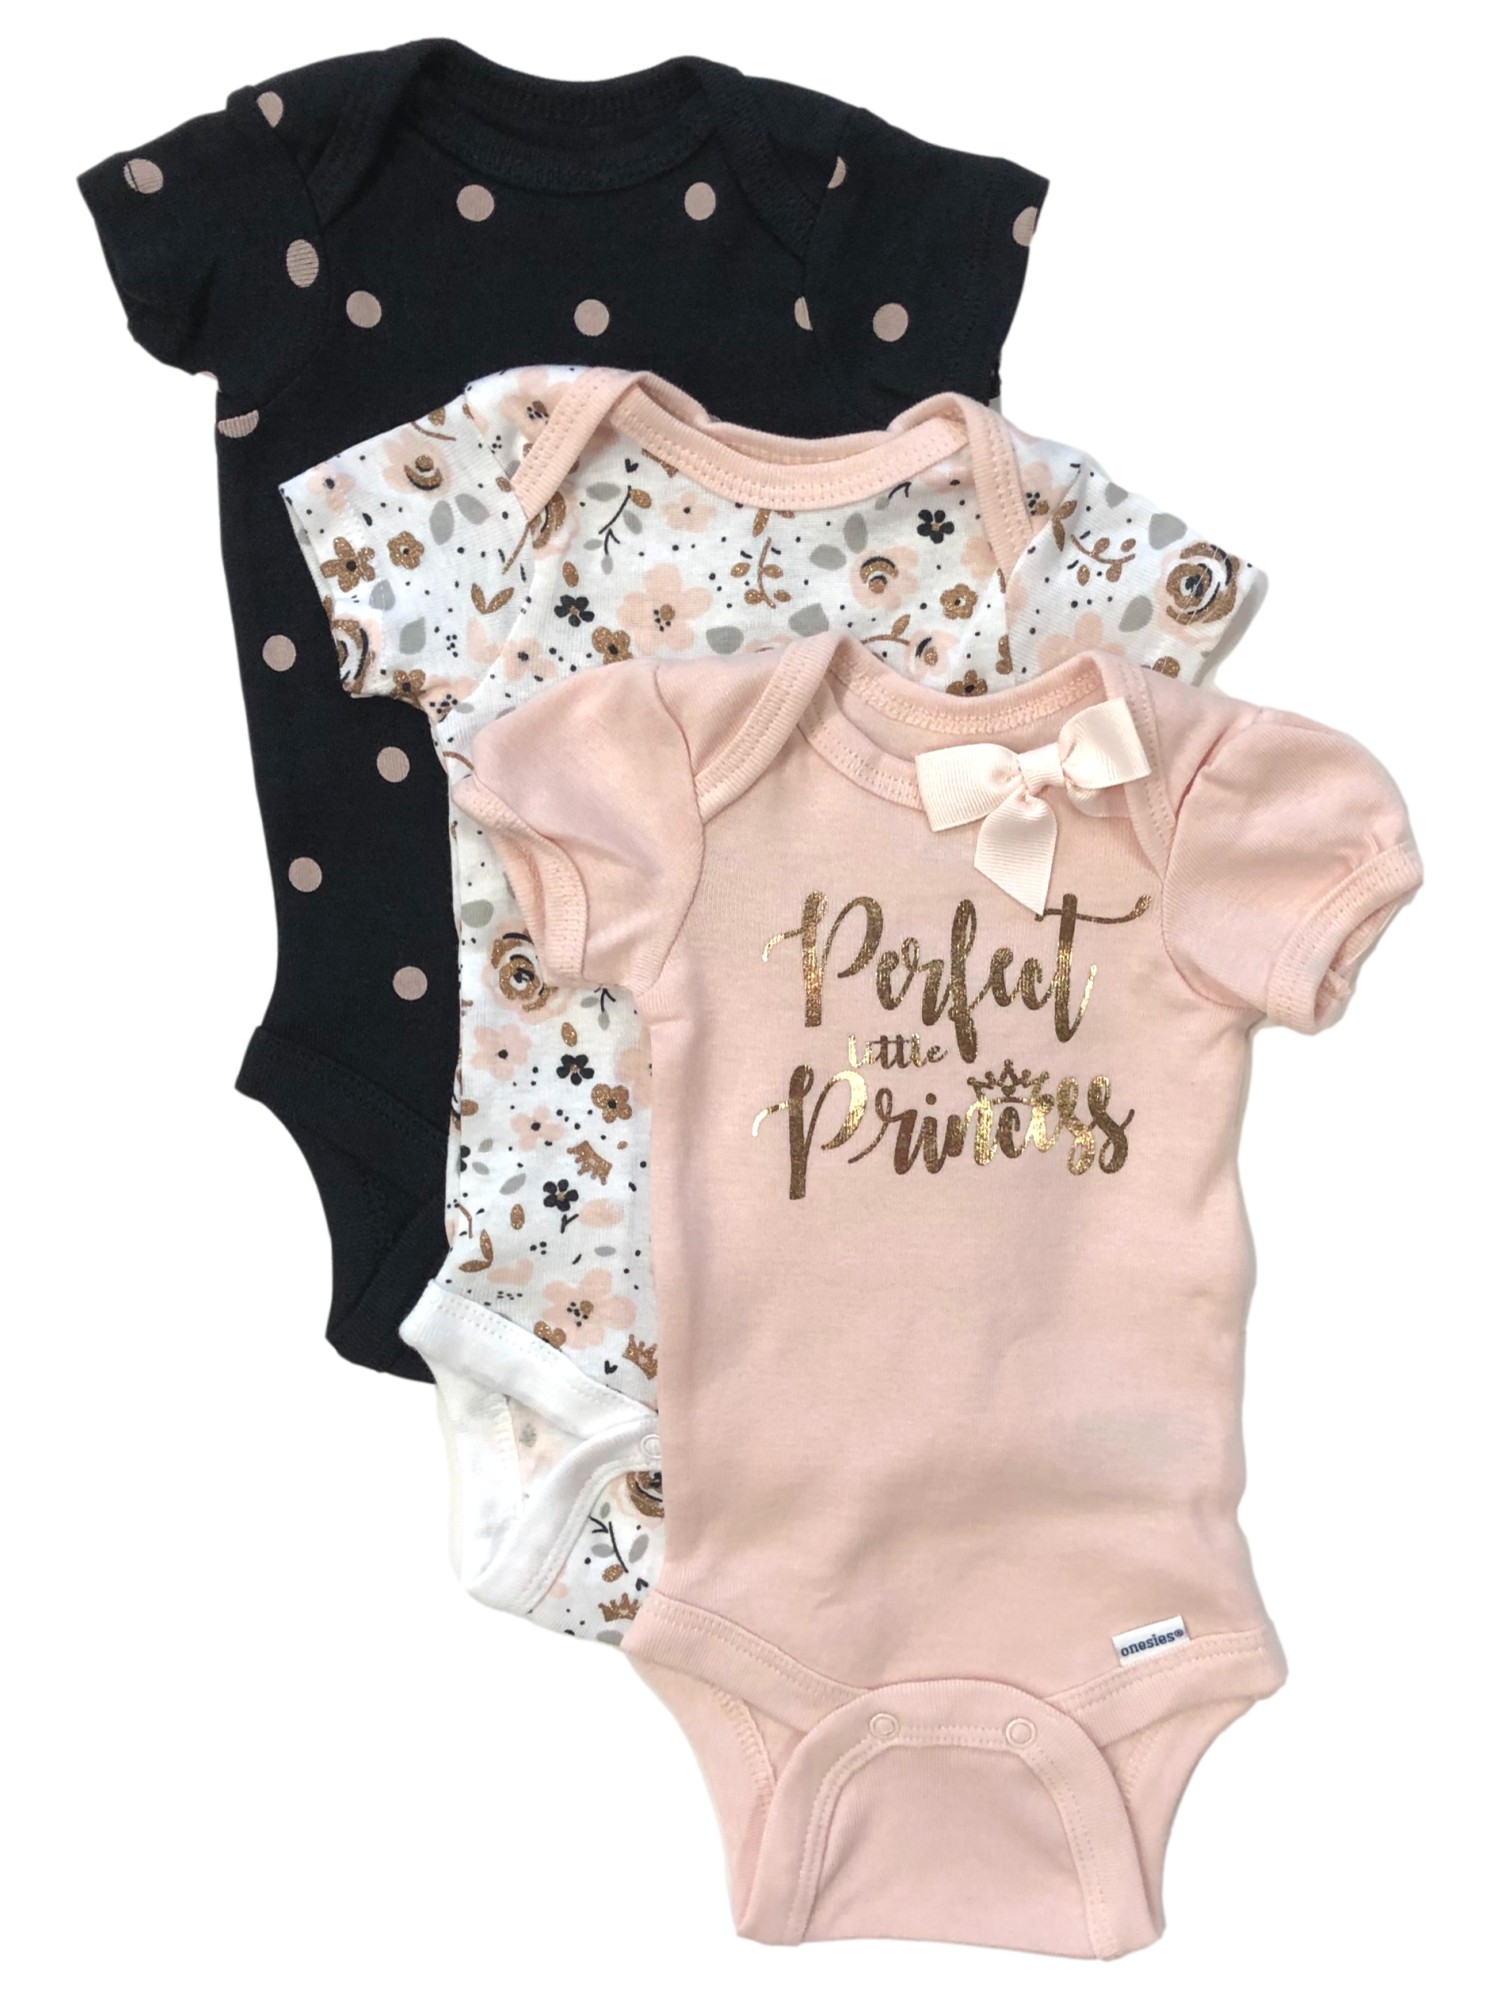 Gerber Infant Girls 3pc Bodysuits Set Pink Perfect Princess Baby Outfit